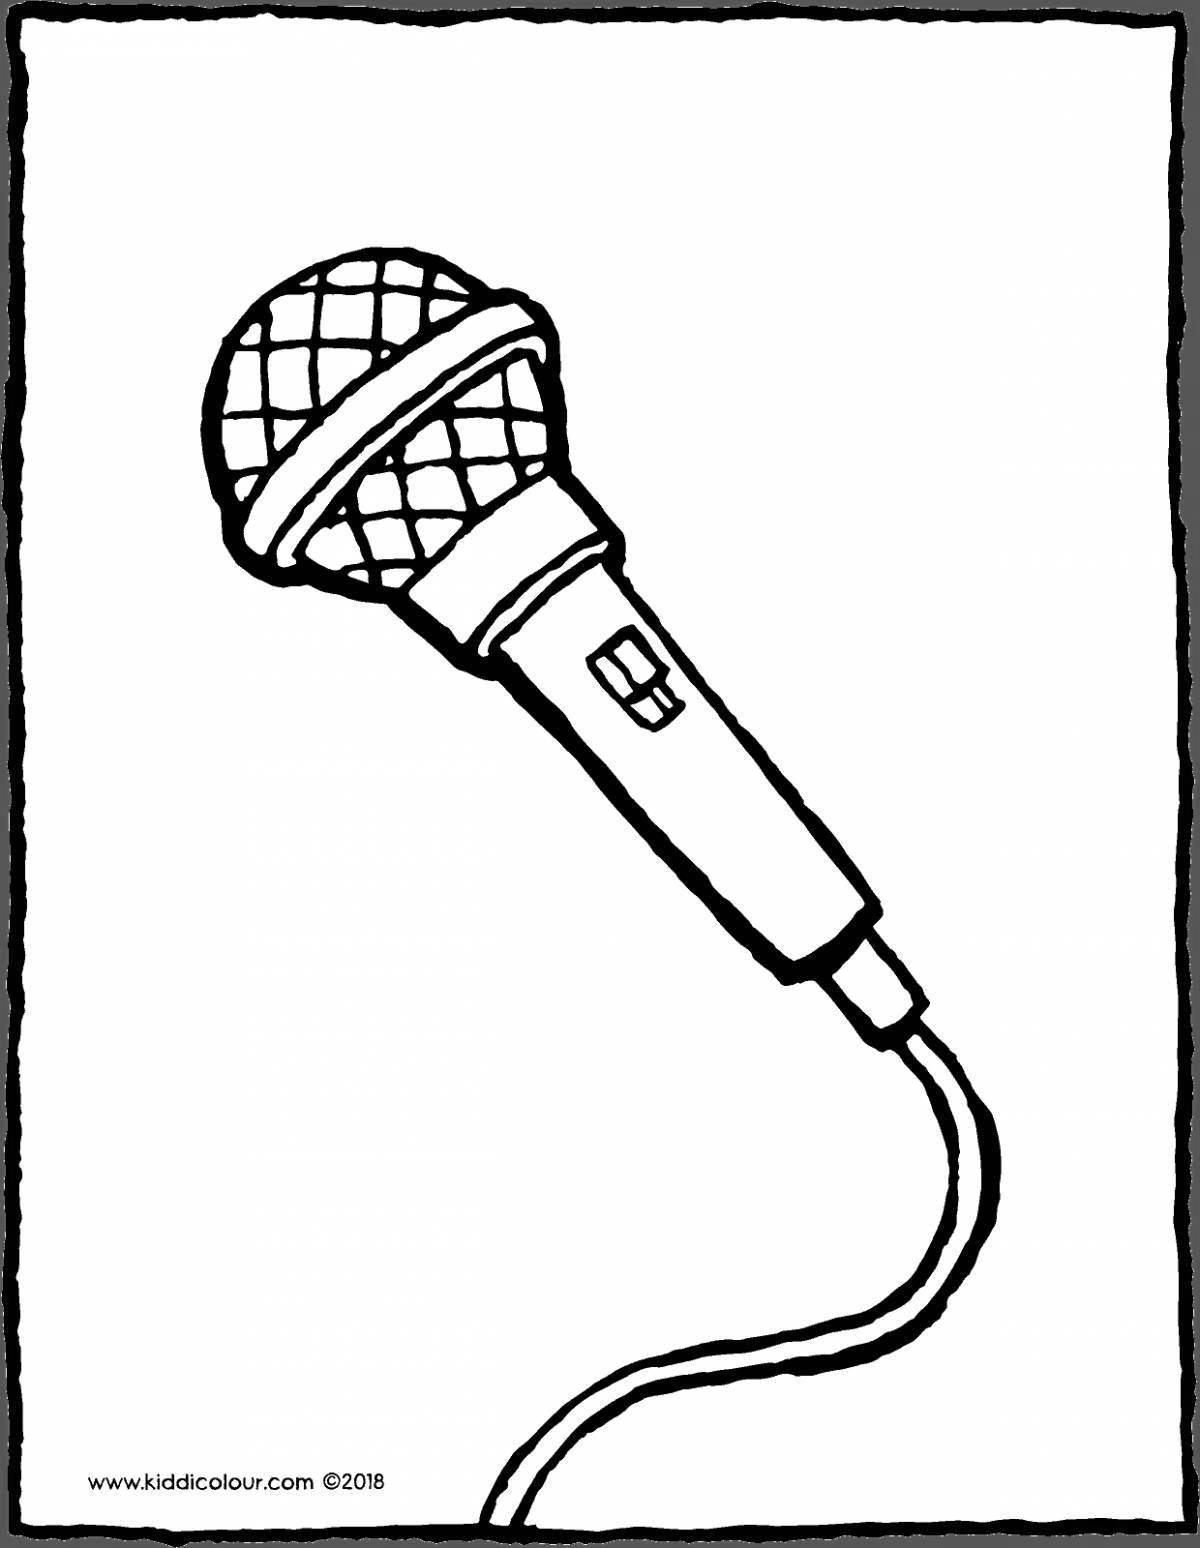 Colorful microphone coloring book for kids